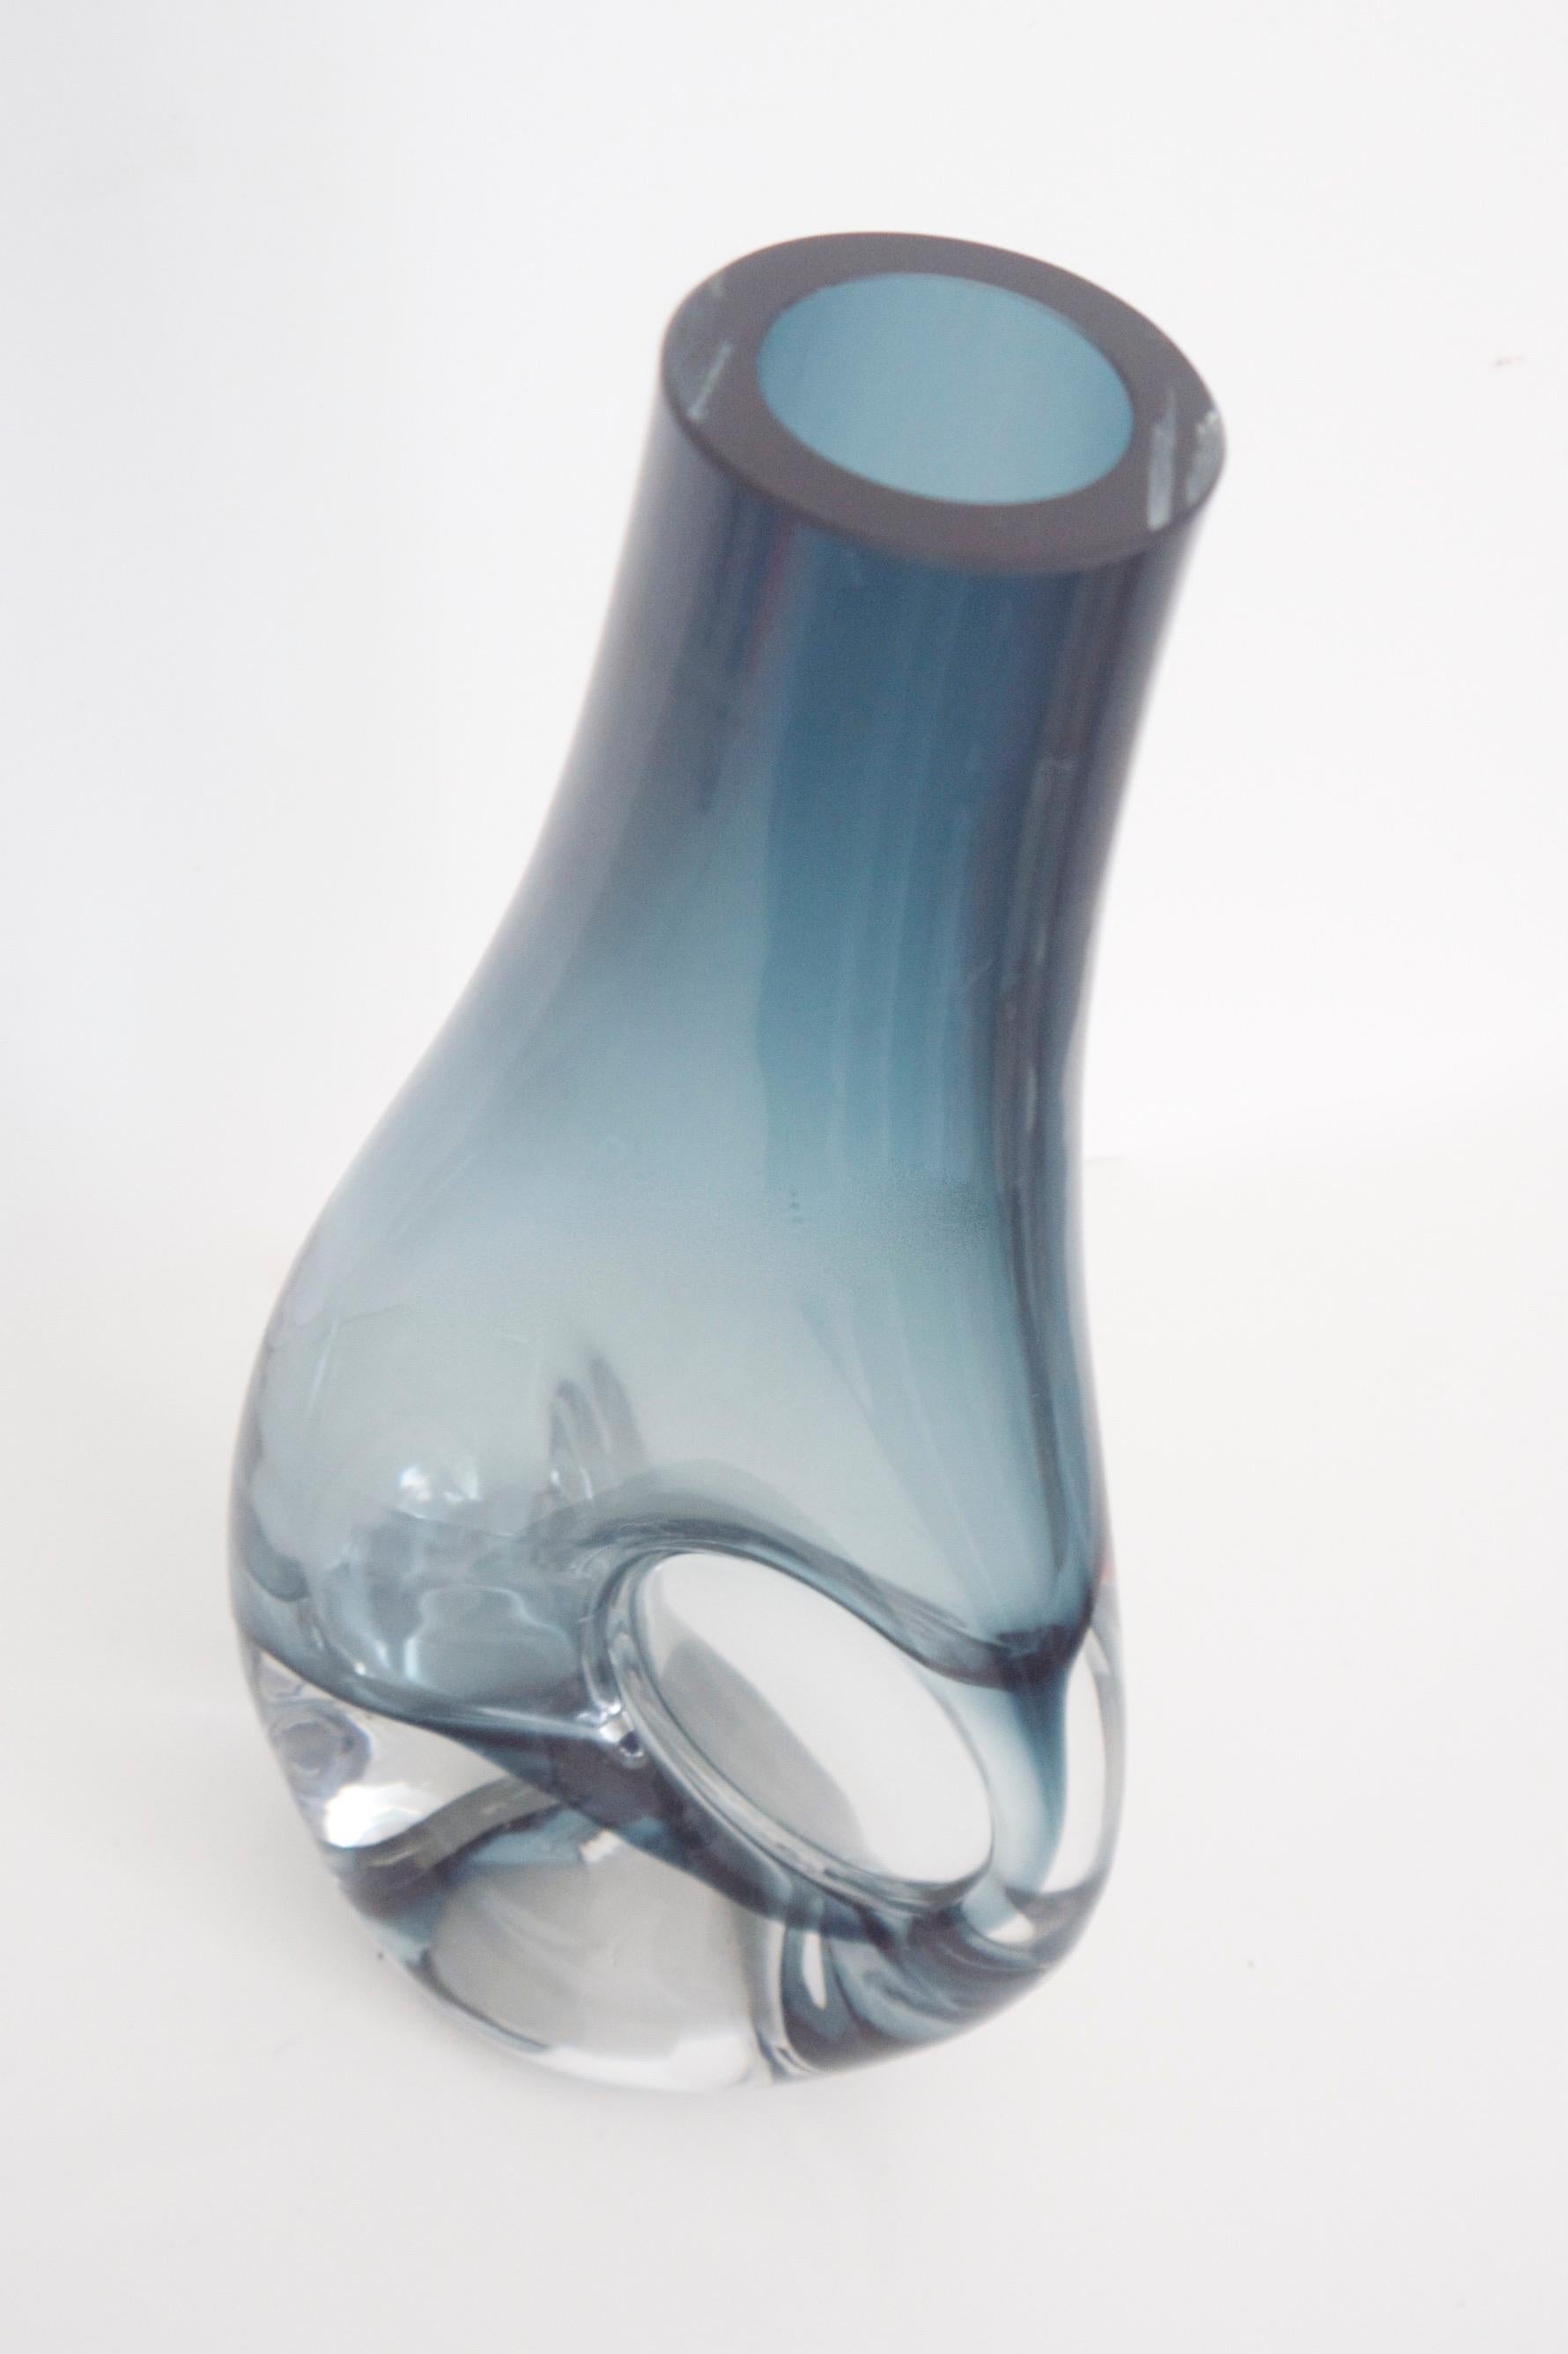 This piece is a grey/blue vintage vase Scandinavian or Italian modern. The design is reminiscent of the style of Fulvio Bianconi, a major exponent of 'Ferato' designs. The piece weighs 2.286 kg and has an opening that is 6 cm in diameter.


 